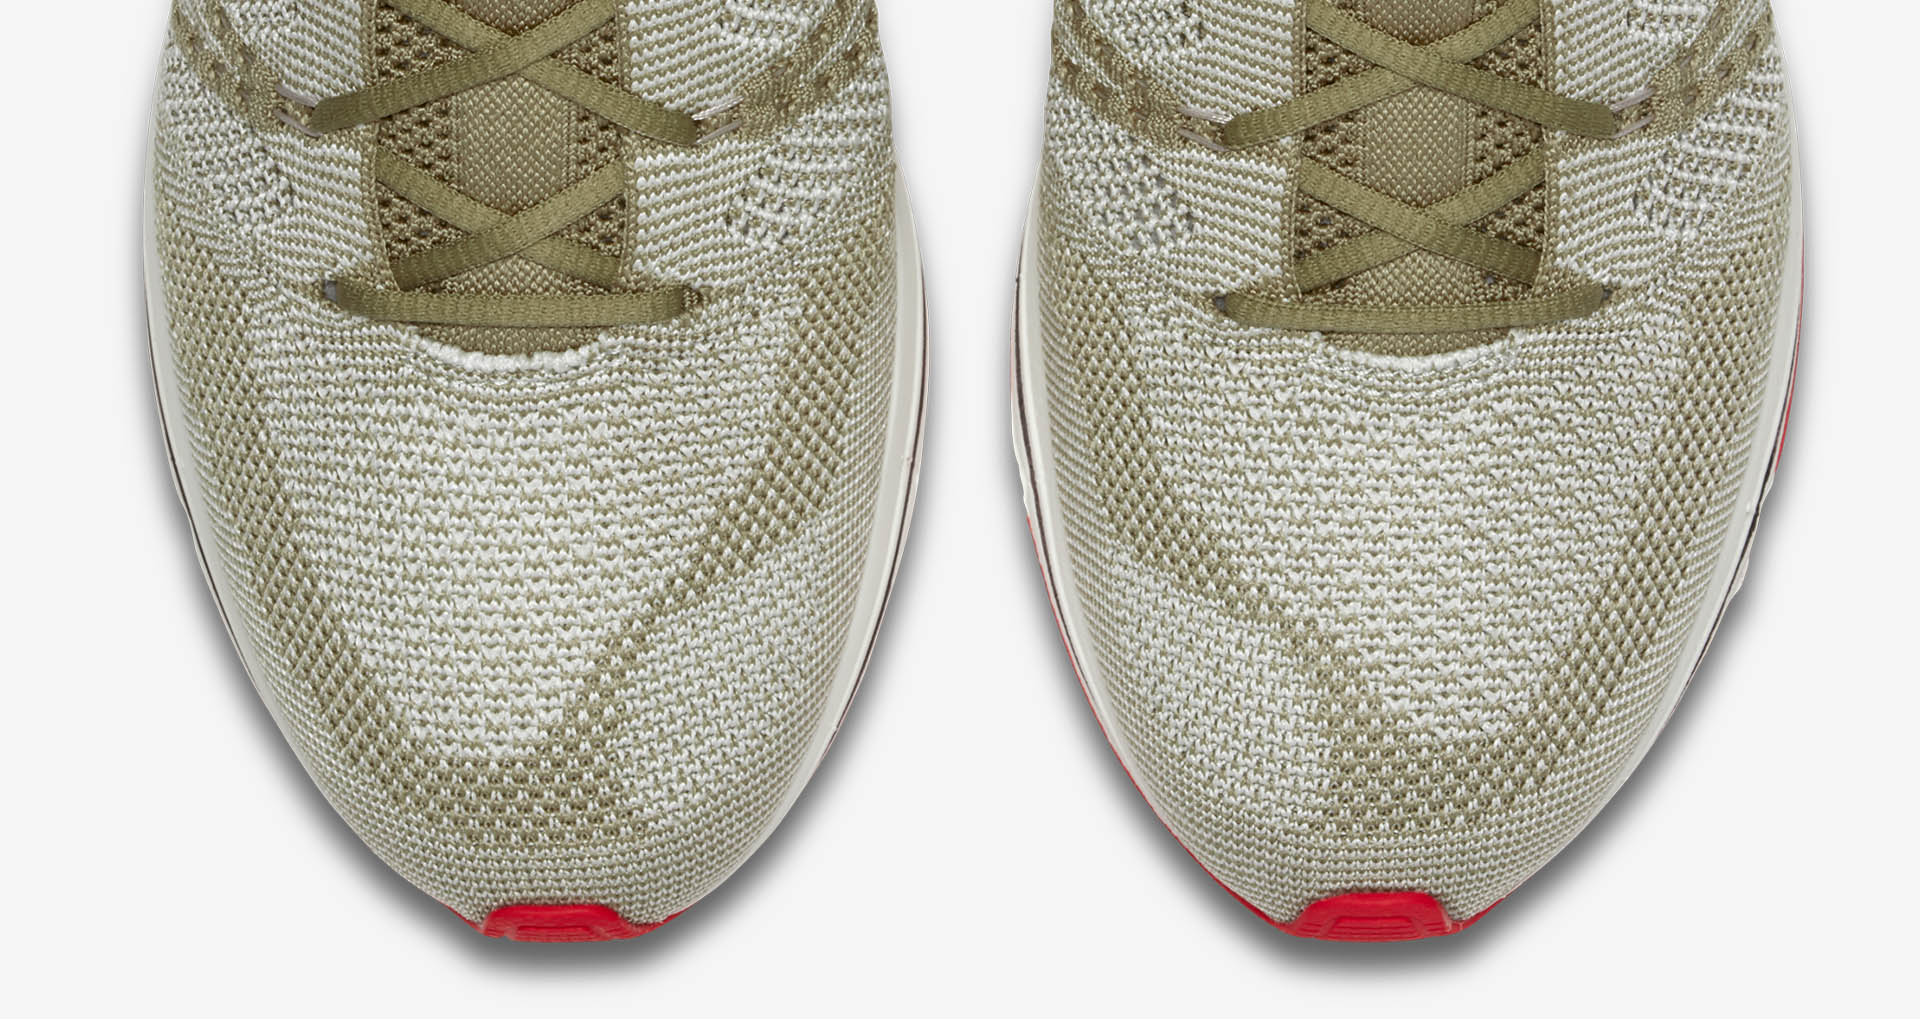 08-nike-flyknit-trainer-olive-brown-ah8396-201